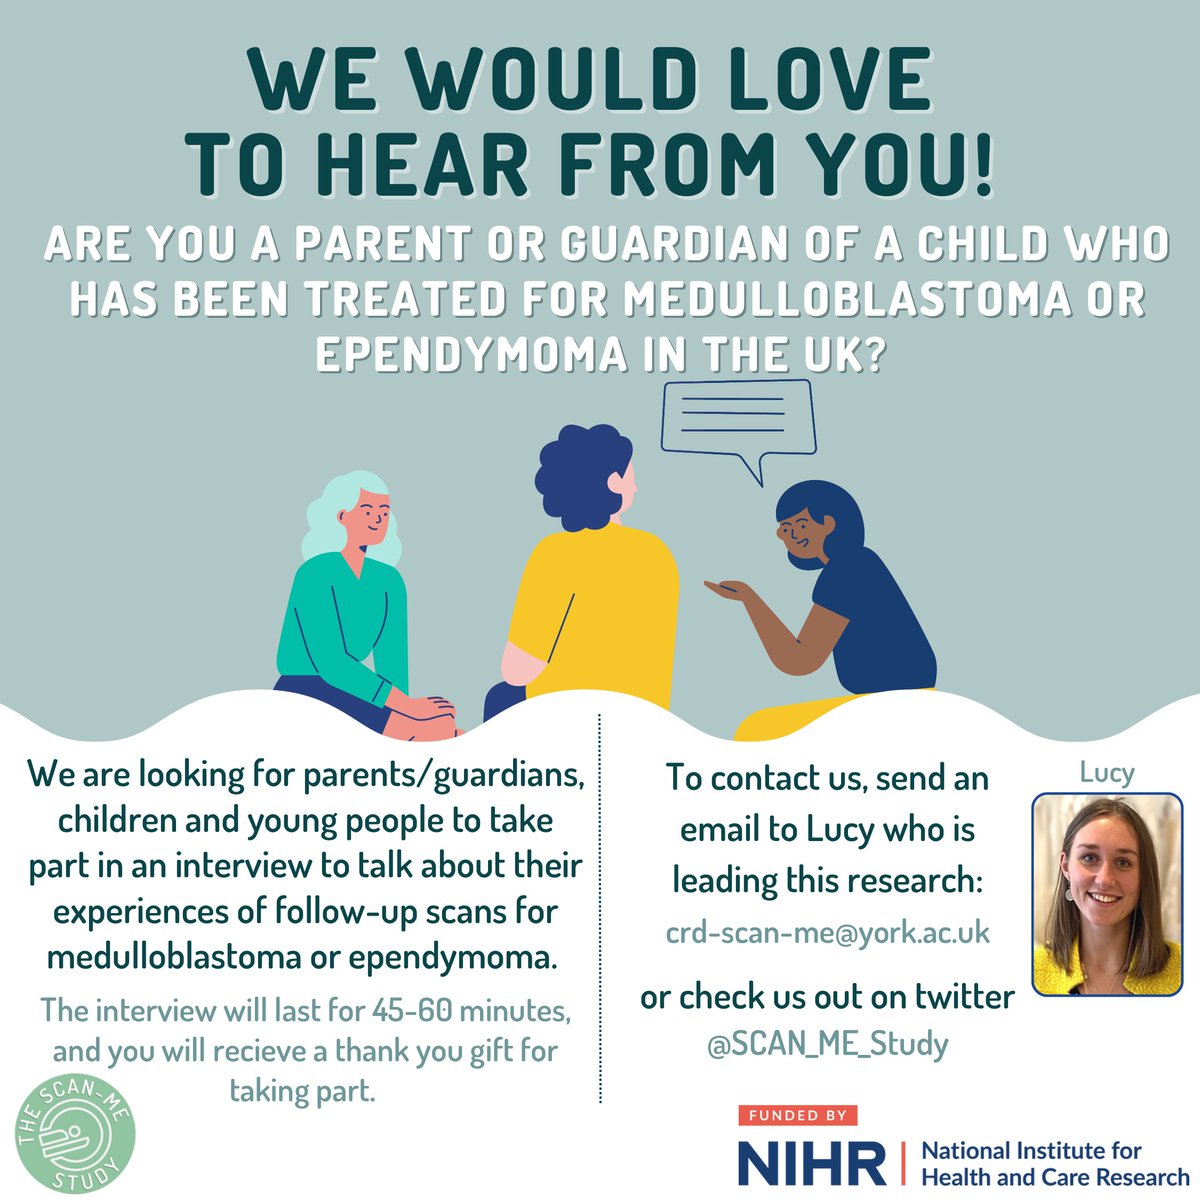 We are happy to say that the SCAN-ME interview study is OPEN for recruitment! If you are a parent/guardian of a child who has had follow-up scans for #medulloblastoma or #ependymoma, we would love to speak to you about your experiences. Find more info about the study below👇